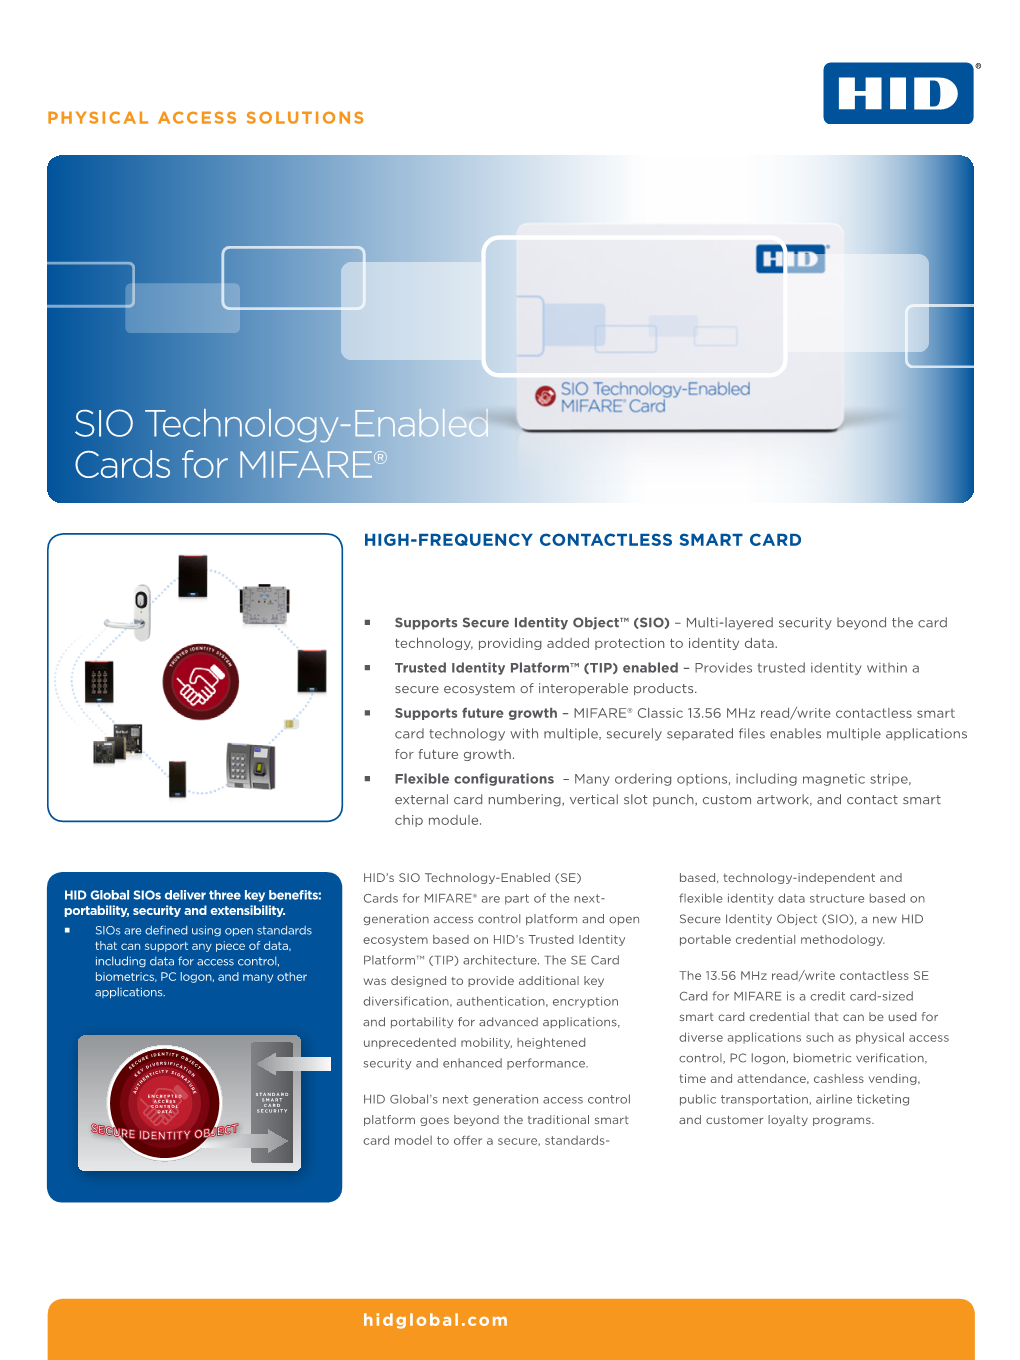 SIO Technology-Enabled Cards for MIFARE®